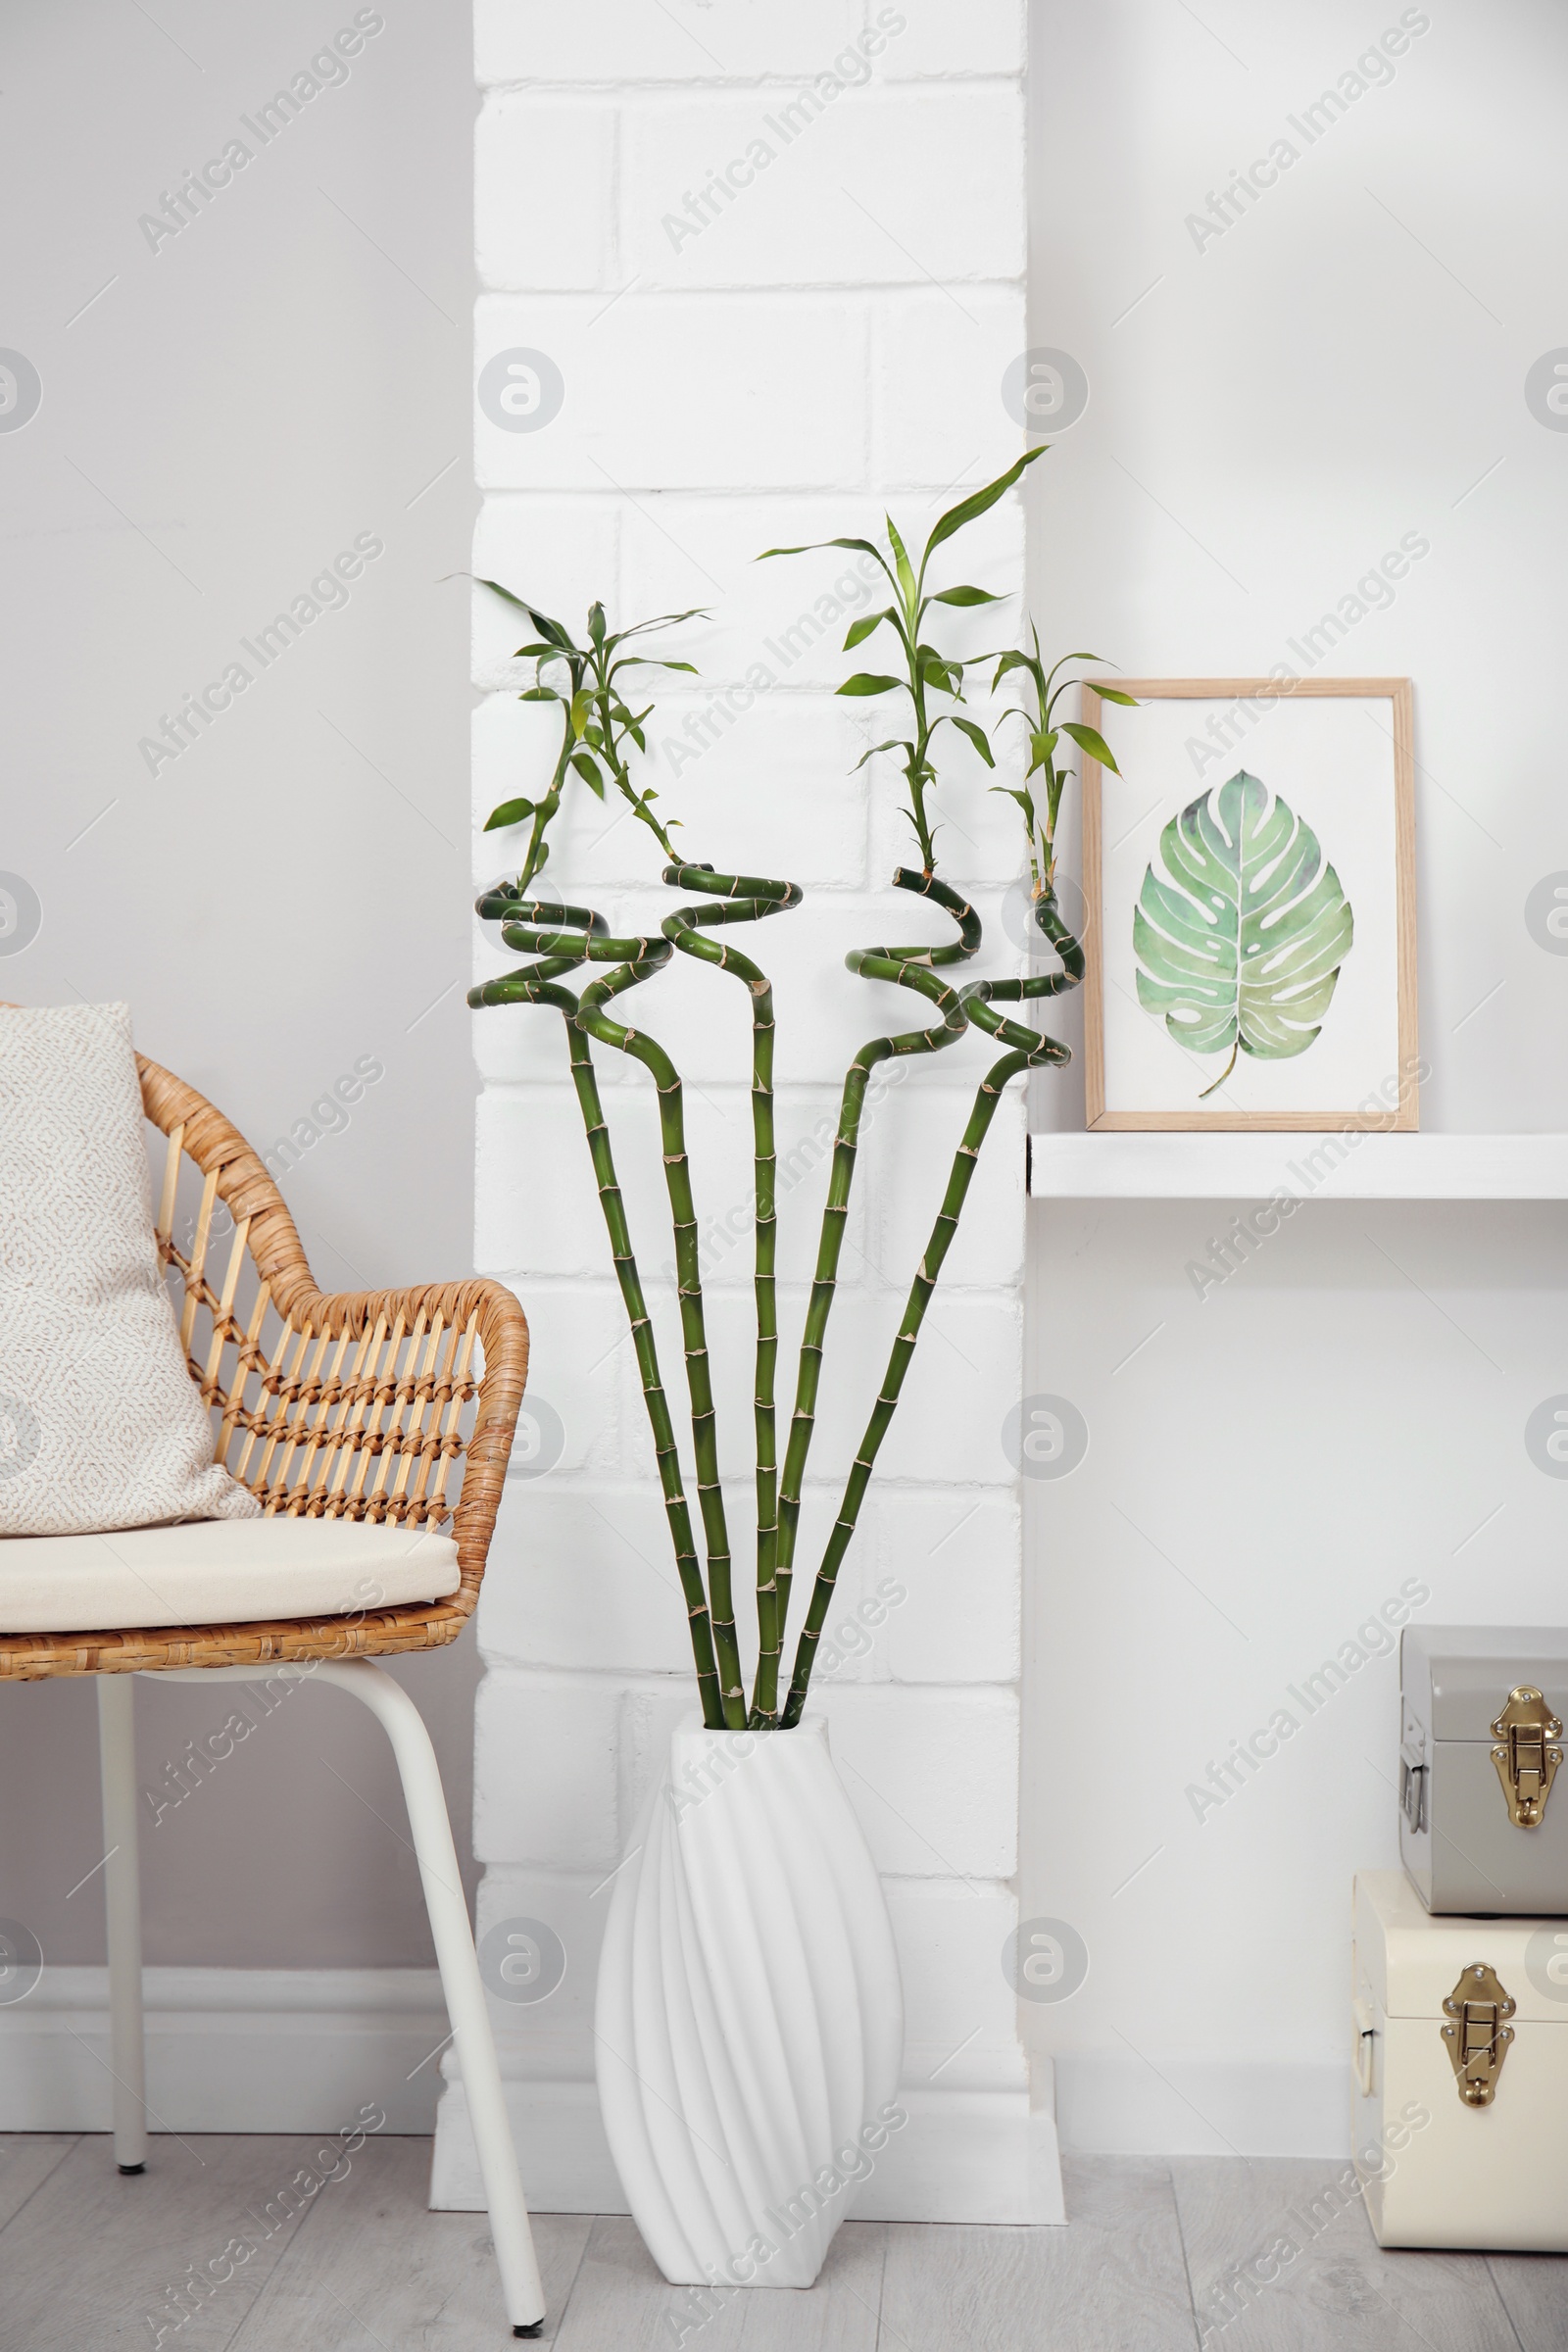 Photo of Vase with green bamboo stems on floor in room. Interior design